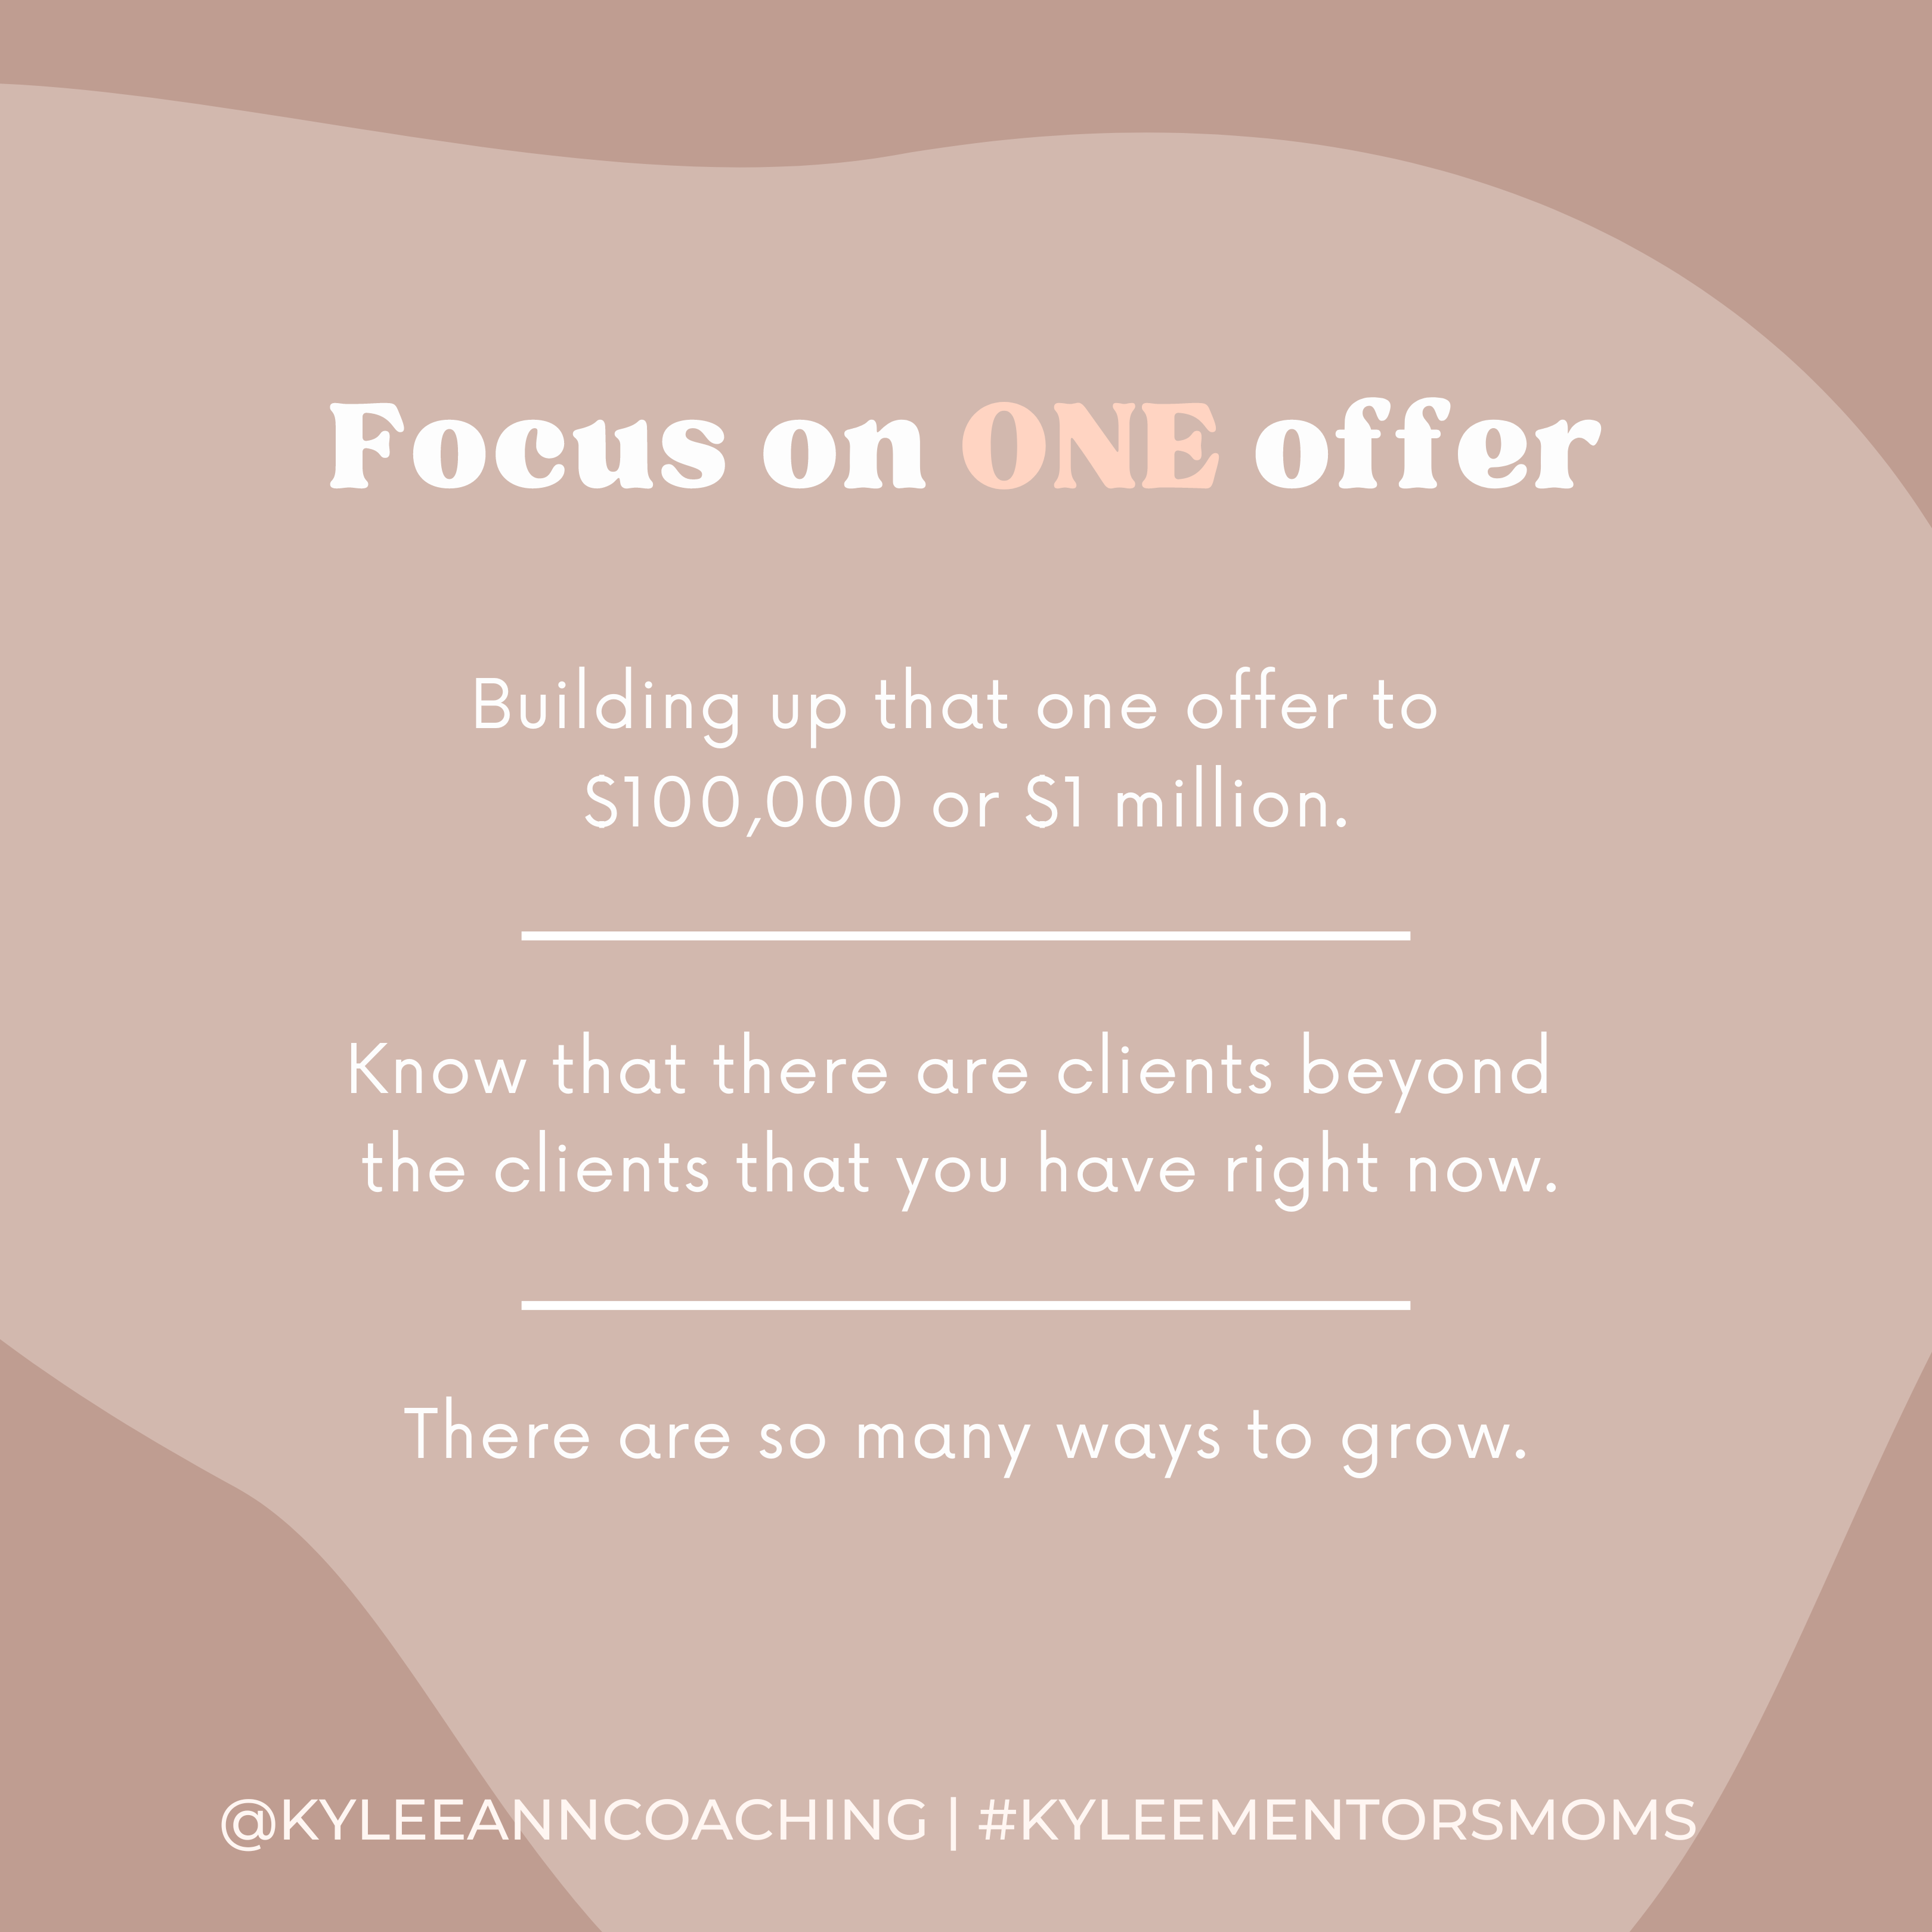 Focus on one offer